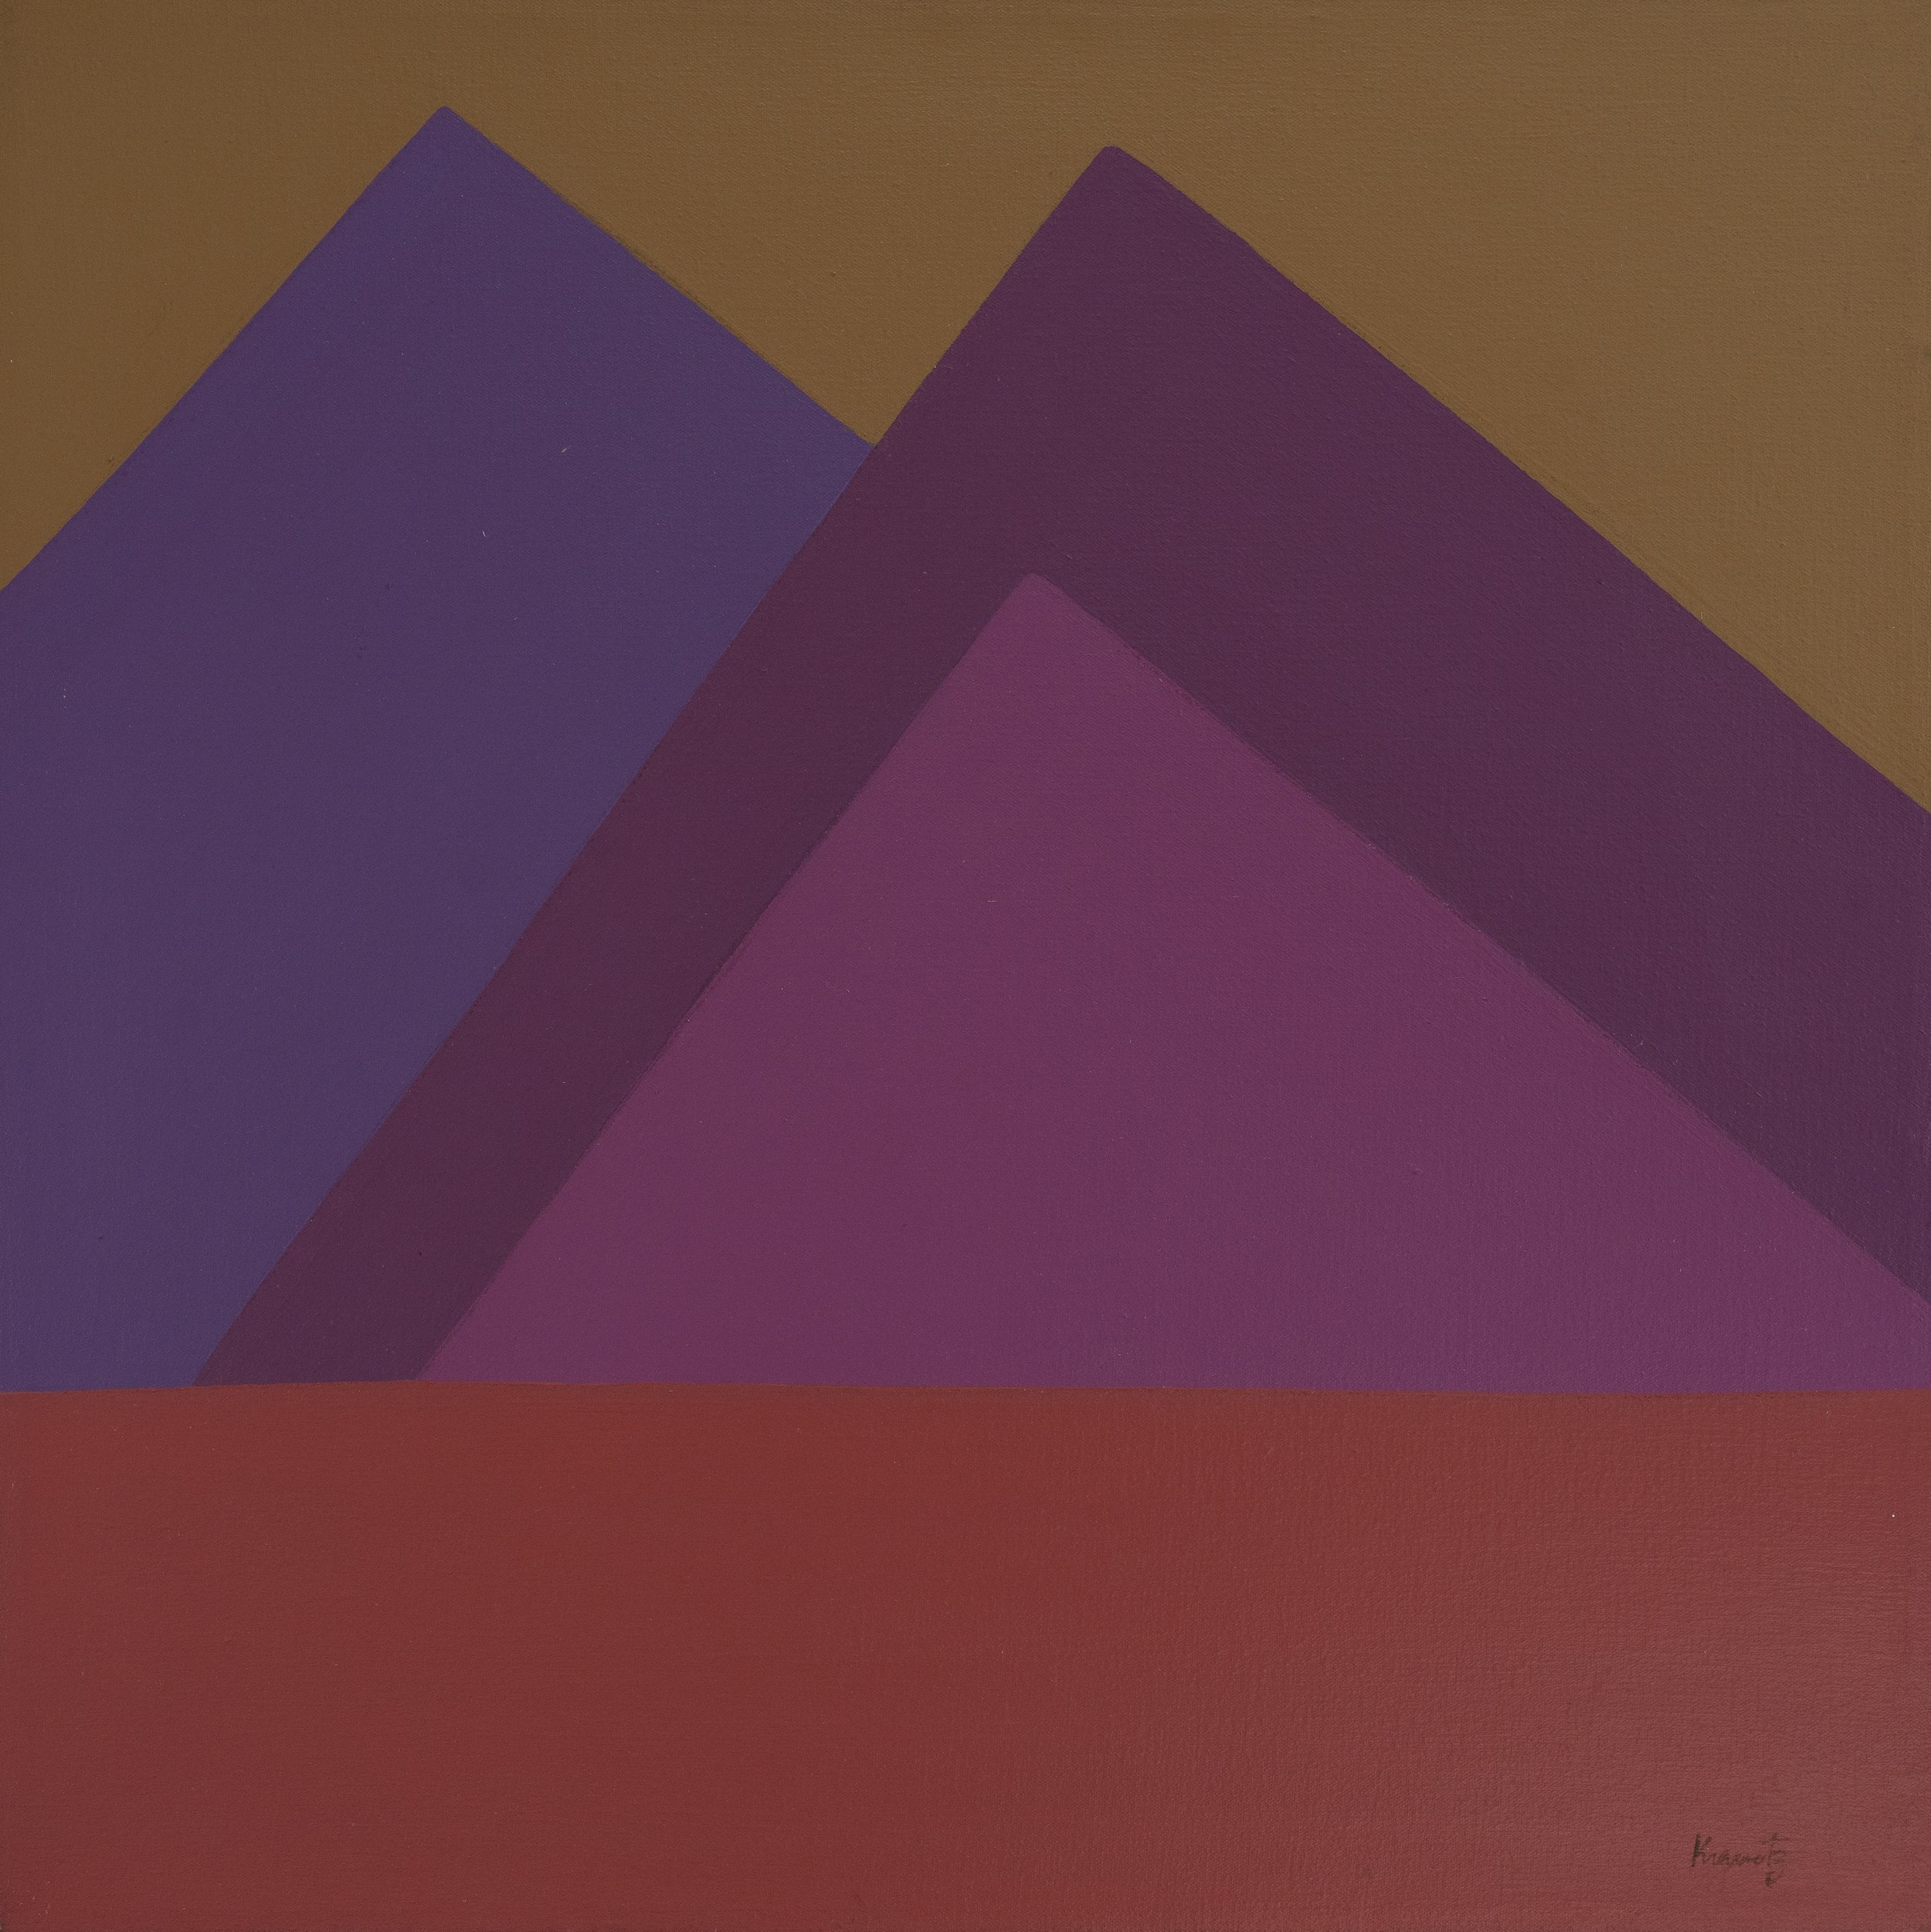 Sunset Colors, 1978, acrylic on canvas, 23x23 inches